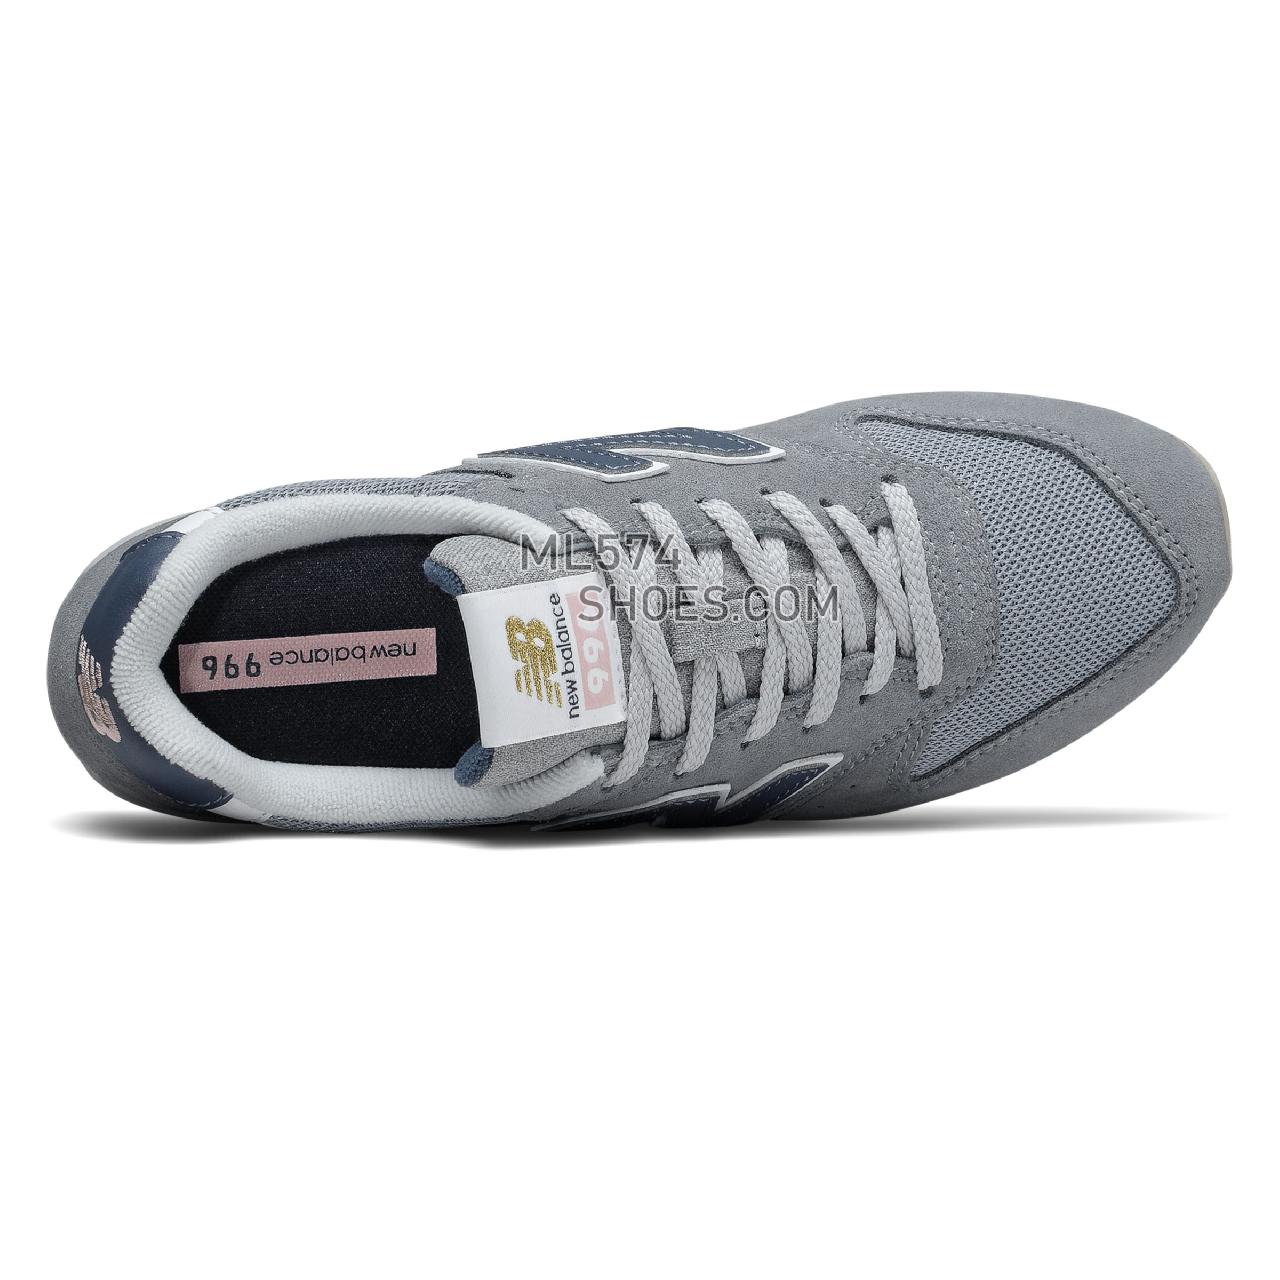 New Balance WL996v2 - Women's Classic Sneakers - Gunmetal with Saturn Pink - WL996WS